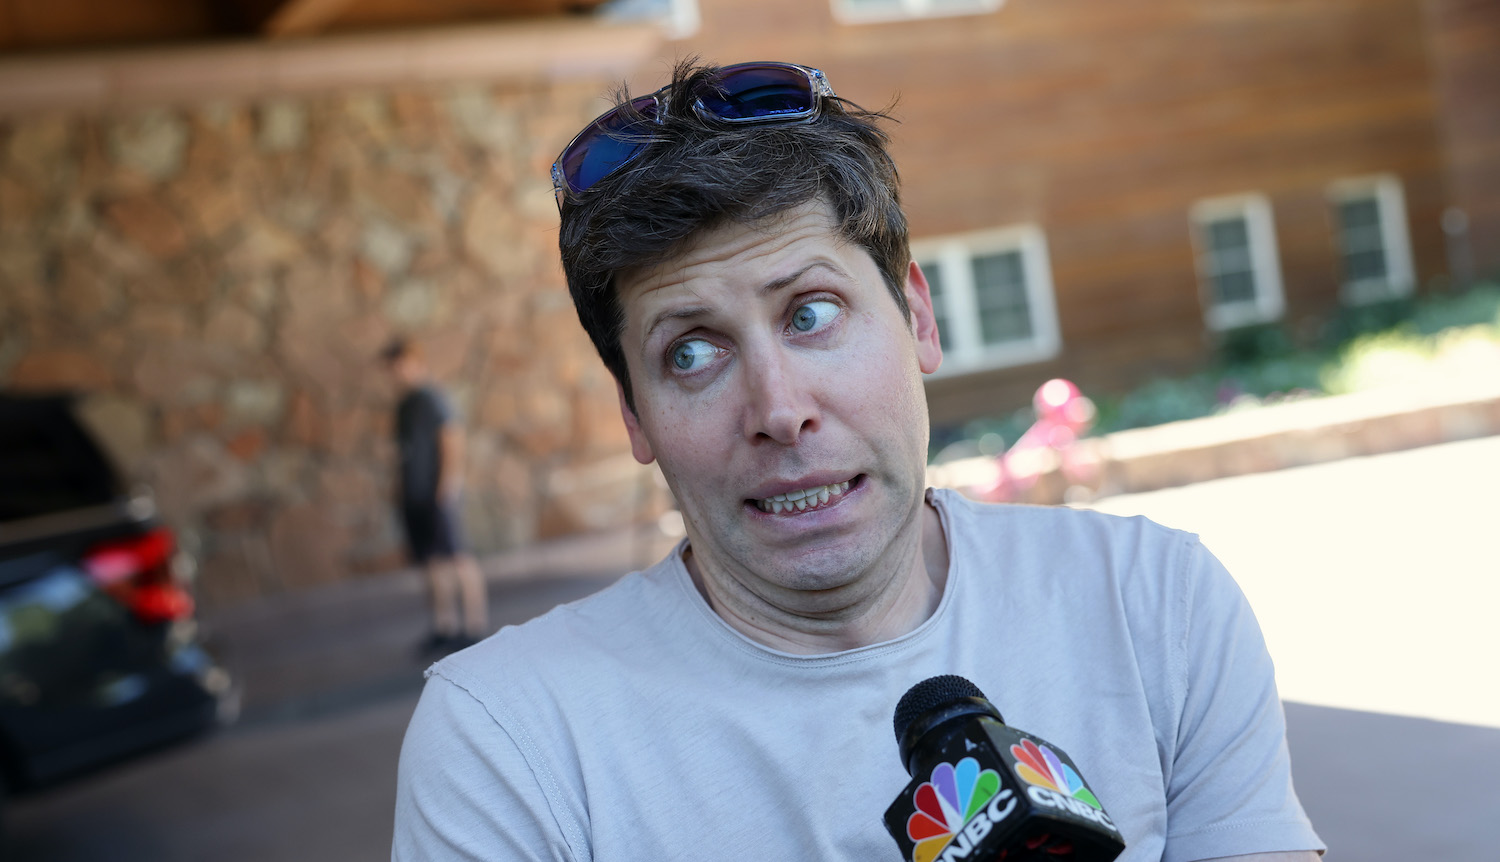 SUN VALLEY, IDAHO - JULY 11: Sam Altman, CEO of OpenAI, speaks to the media as he arrives at the Sun Valley Lodge for the Allen &amp; Company Sun Valley Conference on July 11, 2023 in Sun Valley, Idaho. Every July, some of the world's most wealthy and powerful businesspeople from the media, finance, technology and political spheres converge at the Sun Valley Resort for the exclusive weeklong conference. (Photo by Kevin Dietsch/Getty Images)